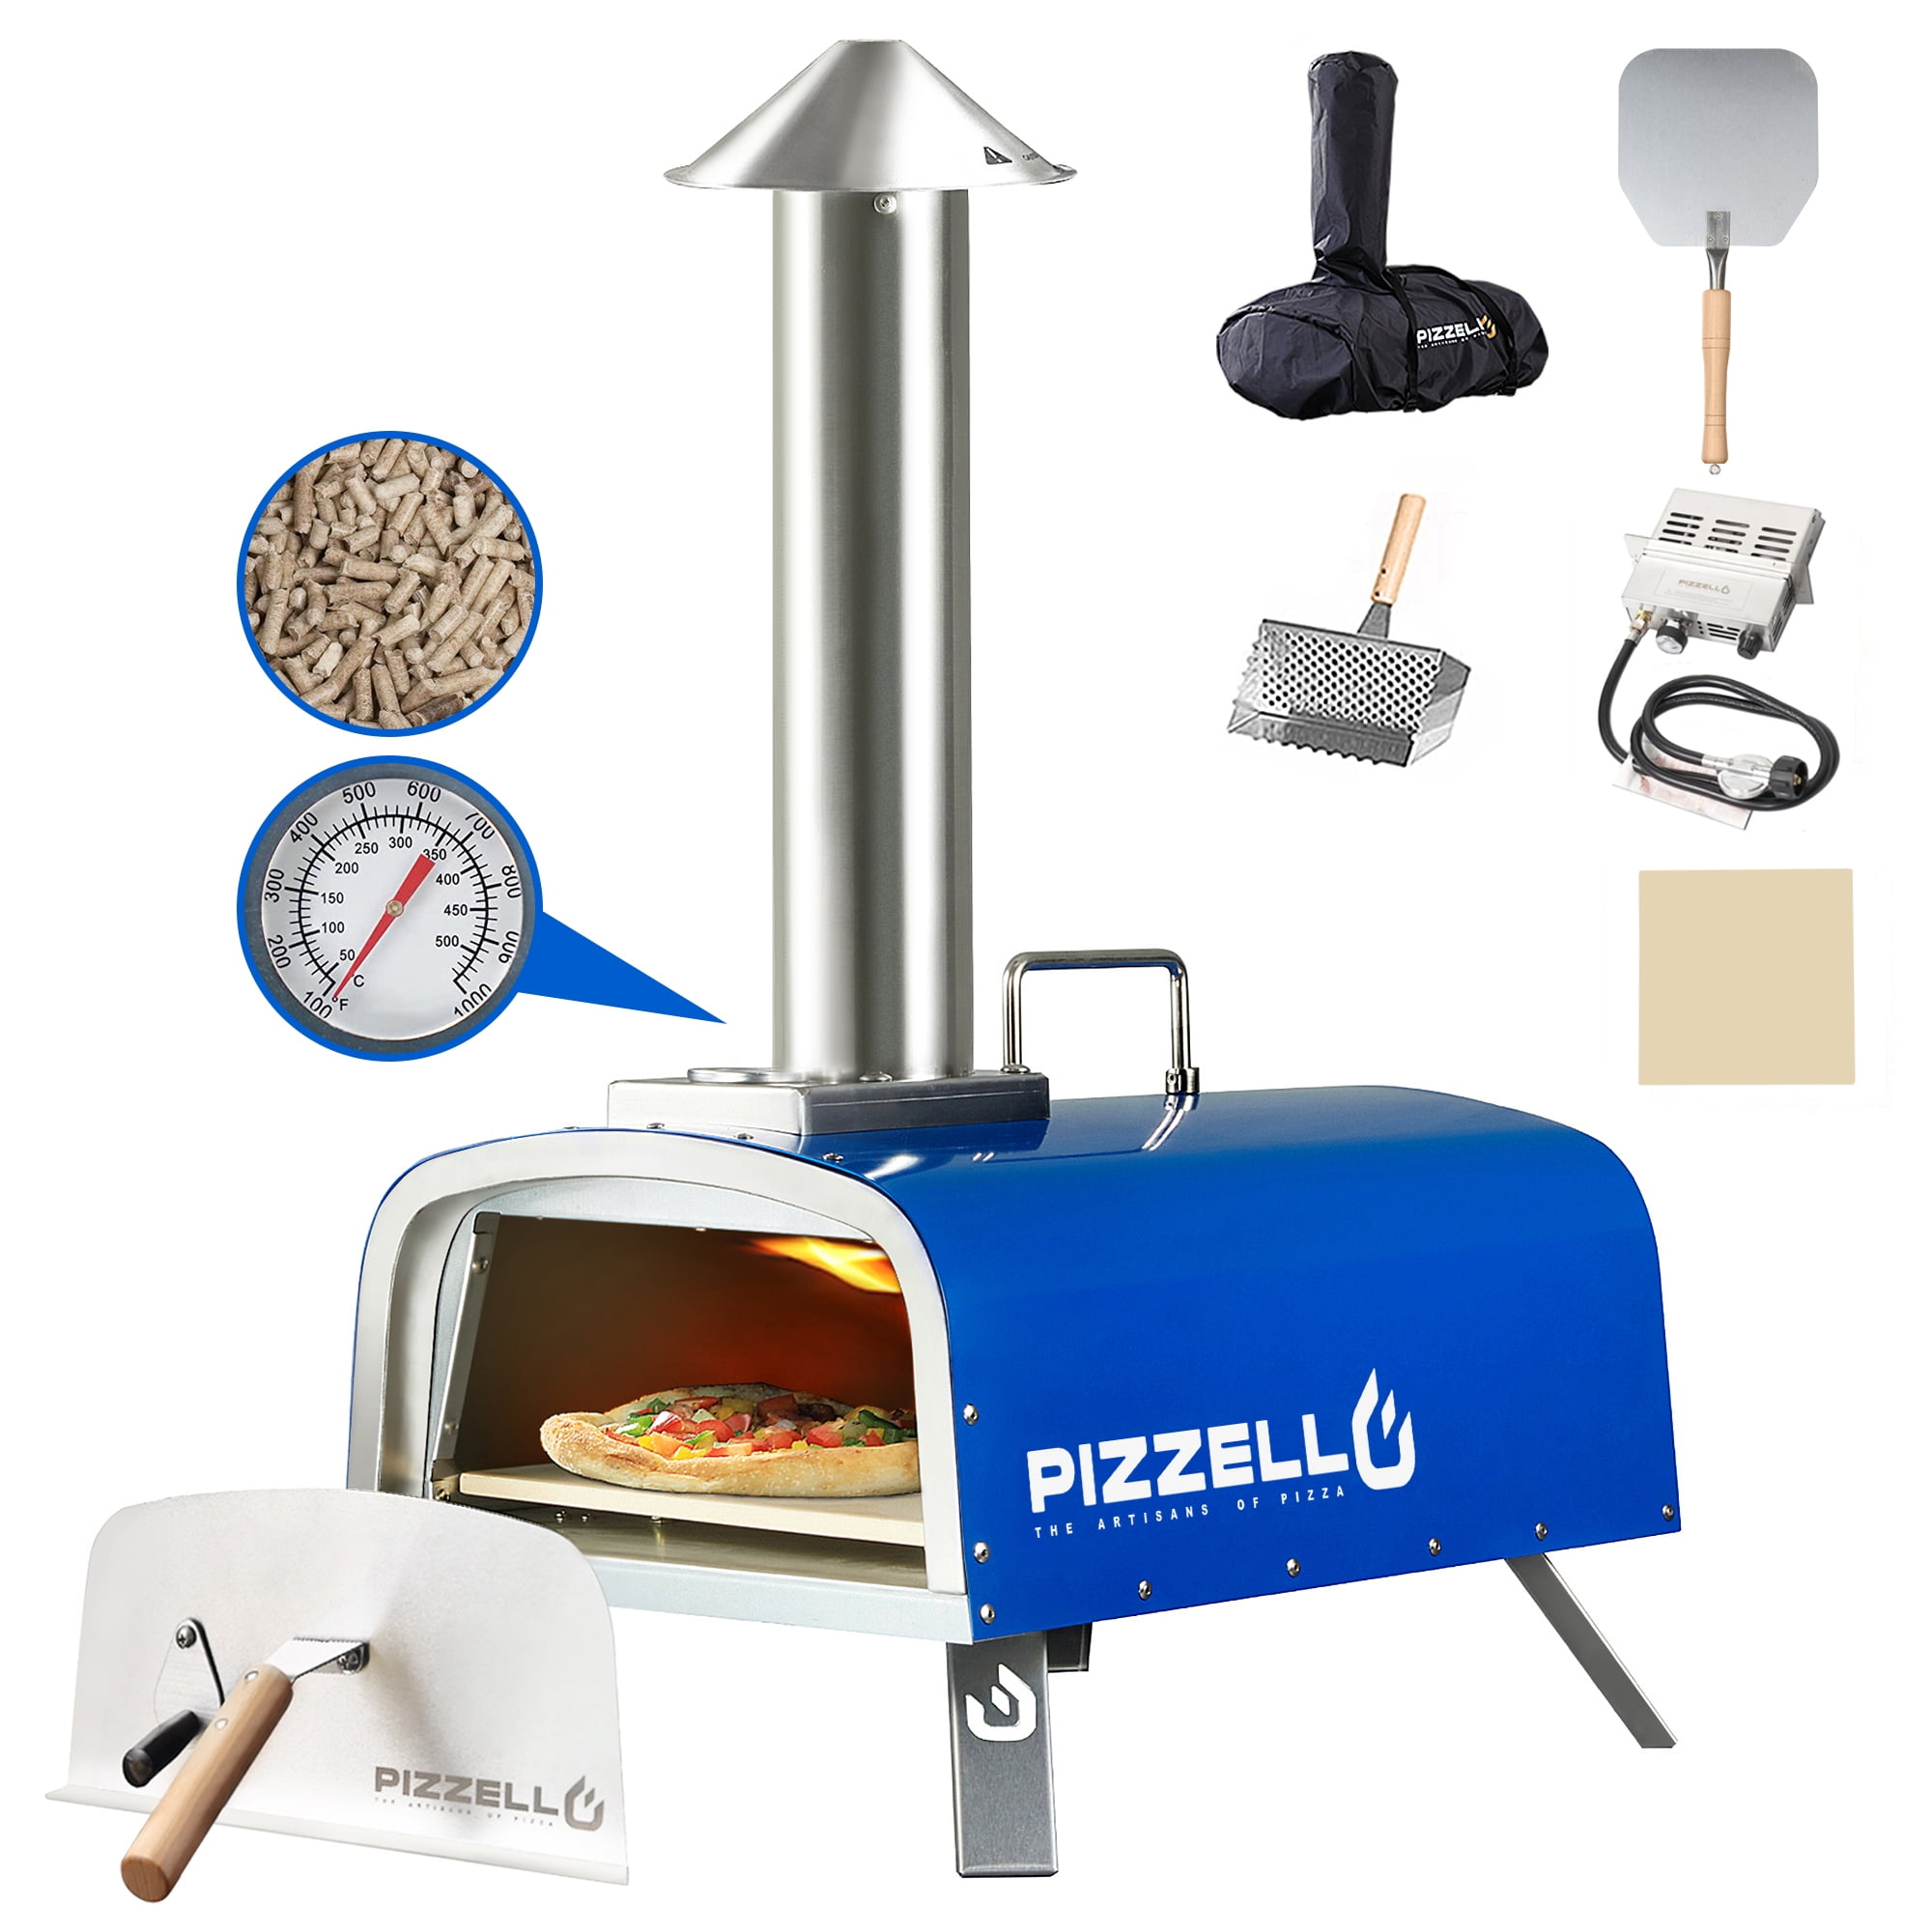 Matrix Decor 15.7 in. Wood Burning Stainless Steel Portable Outdoor Pizza Oven with Complete Accessories for Outdoor Cooking, Blue-Green